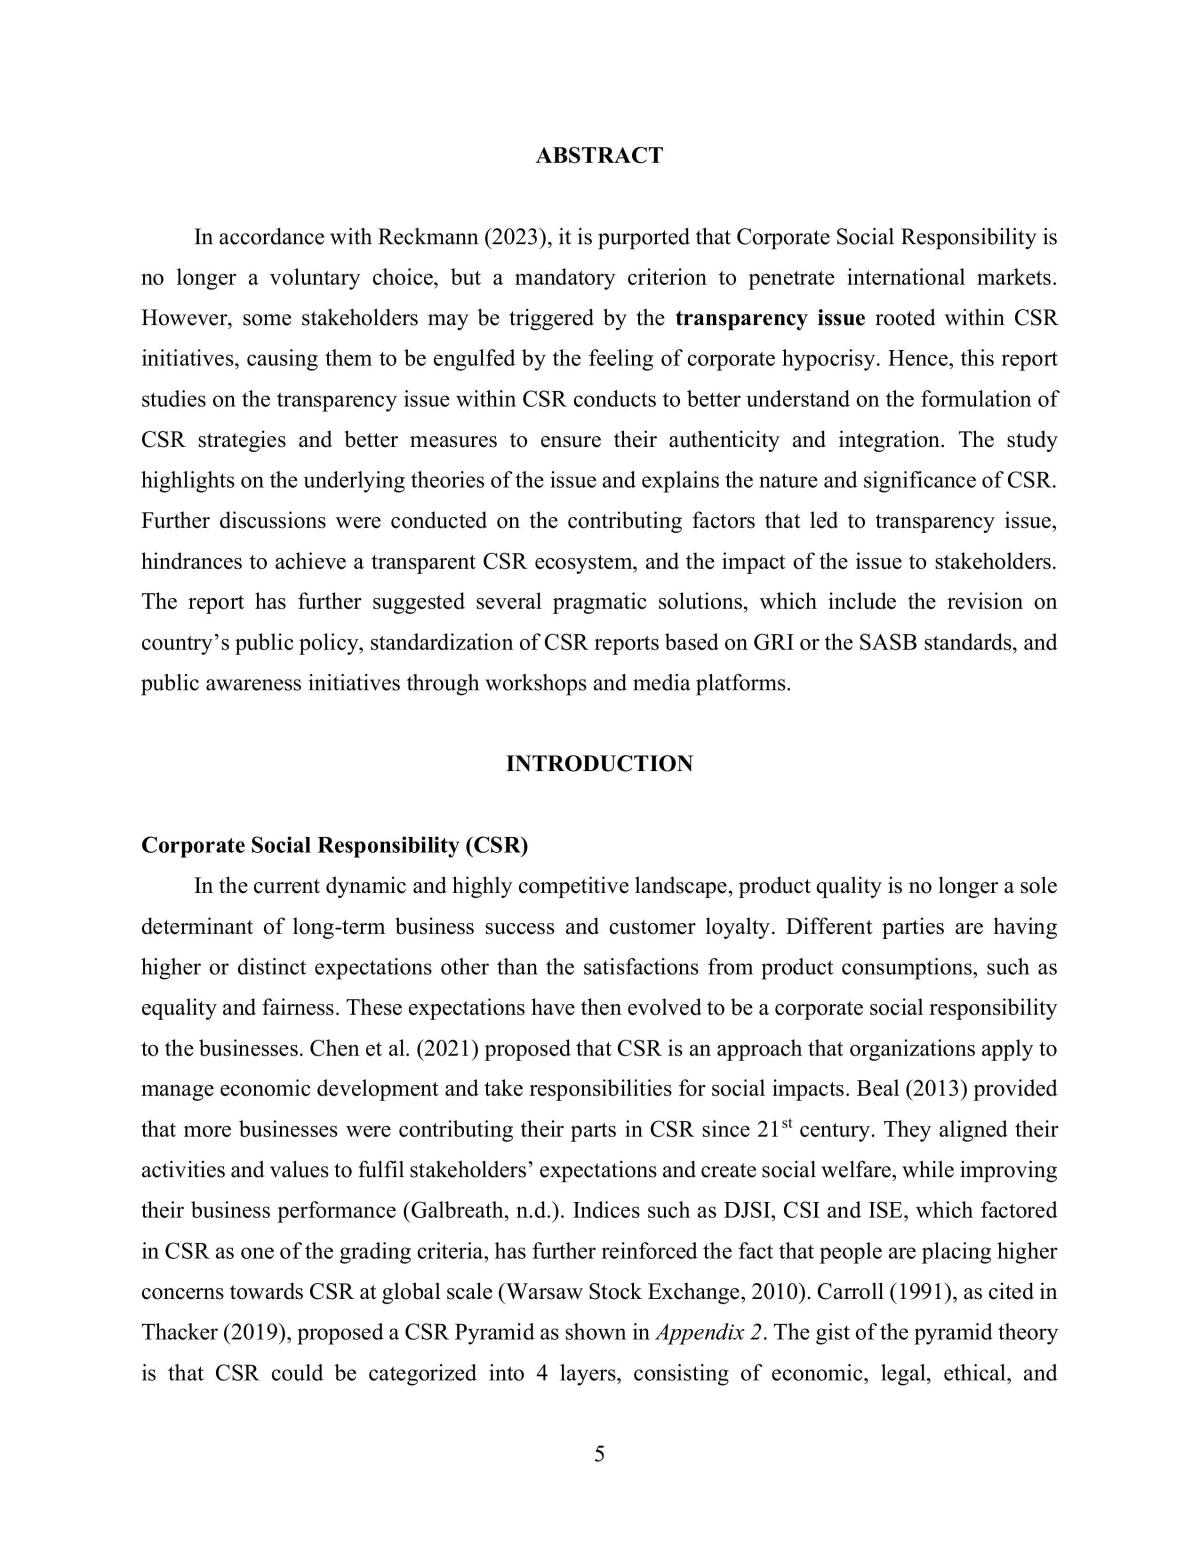 Project discussing corporate social responsibility - Page 3